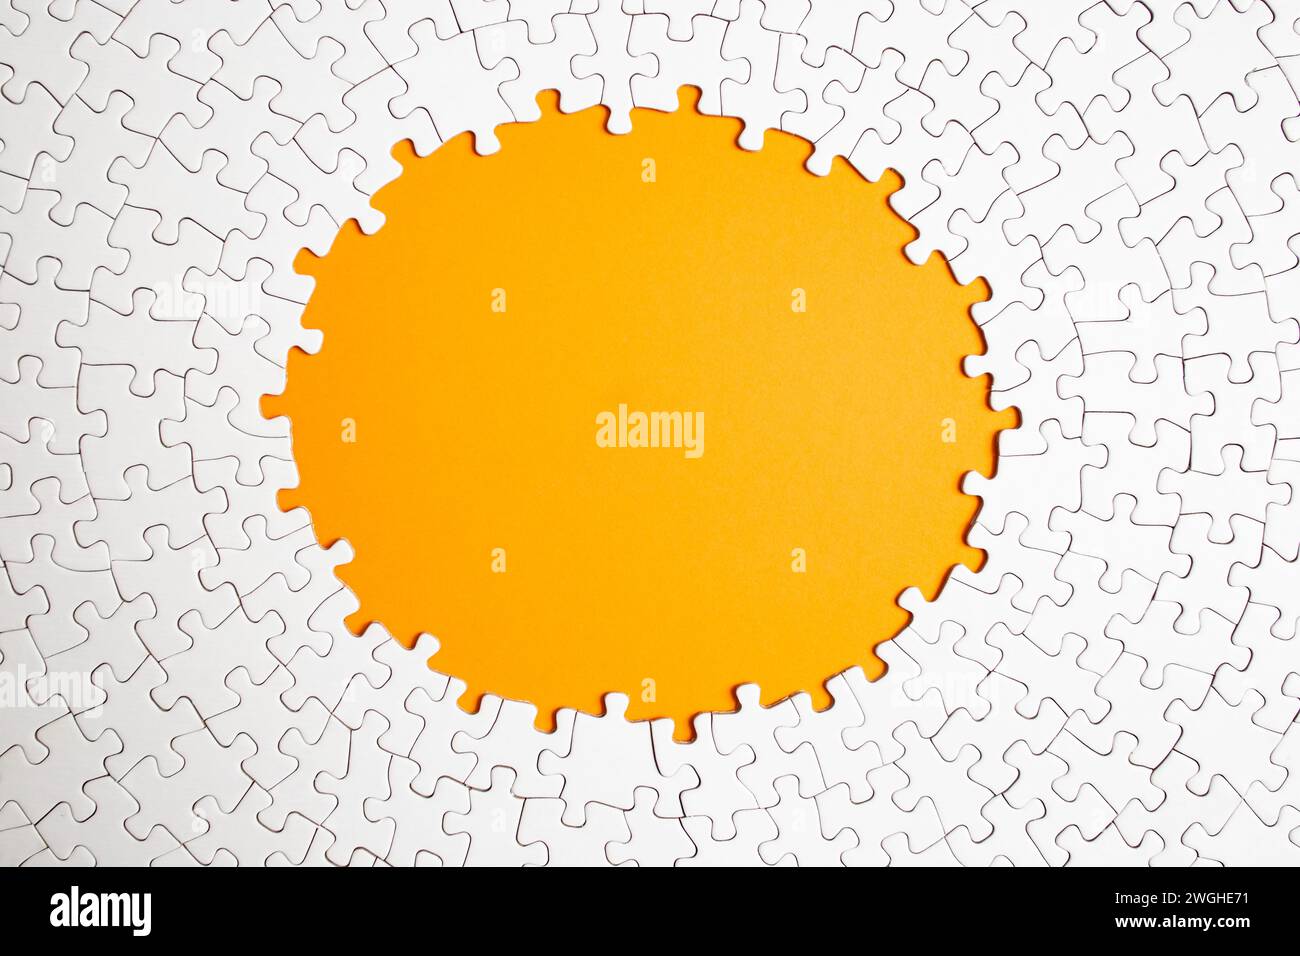 Plain white jigsaw puzzle  on yellow color background, oval shaped frame Stock Photo